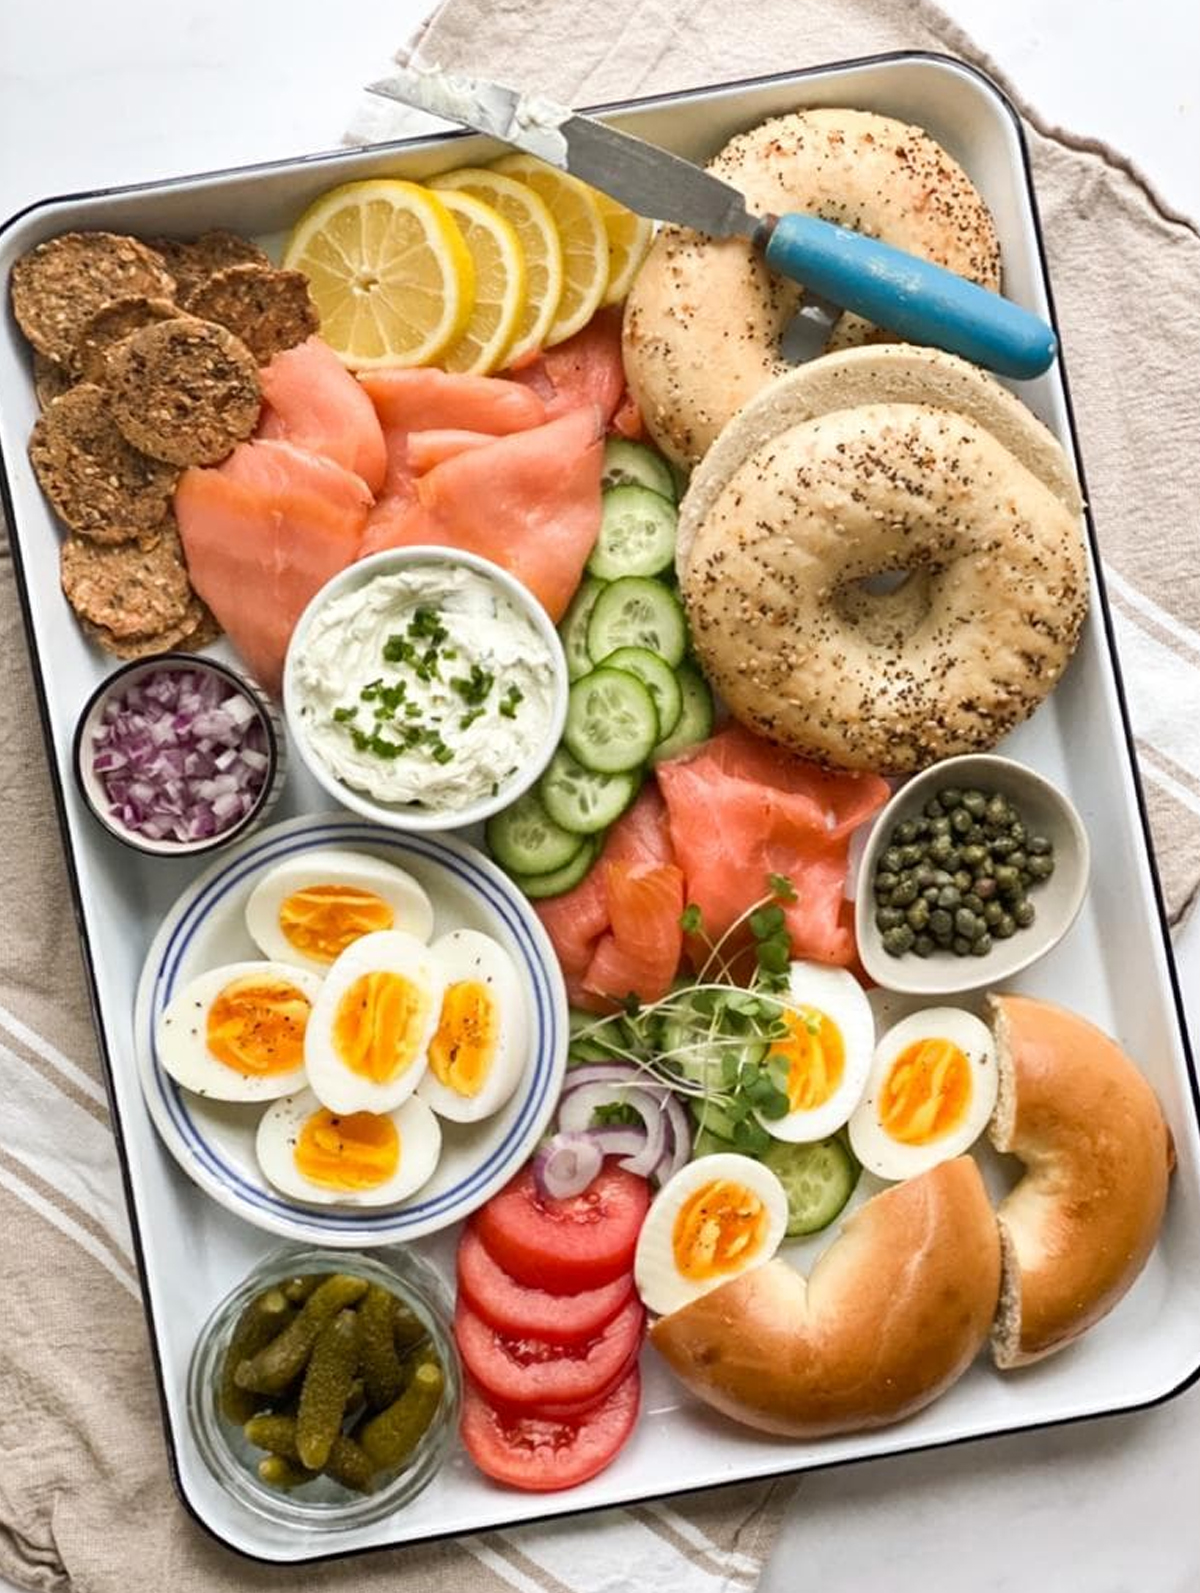 The family food kitchen created a simple board with bagels, cucumbers, hard boiled eggs, and capers.